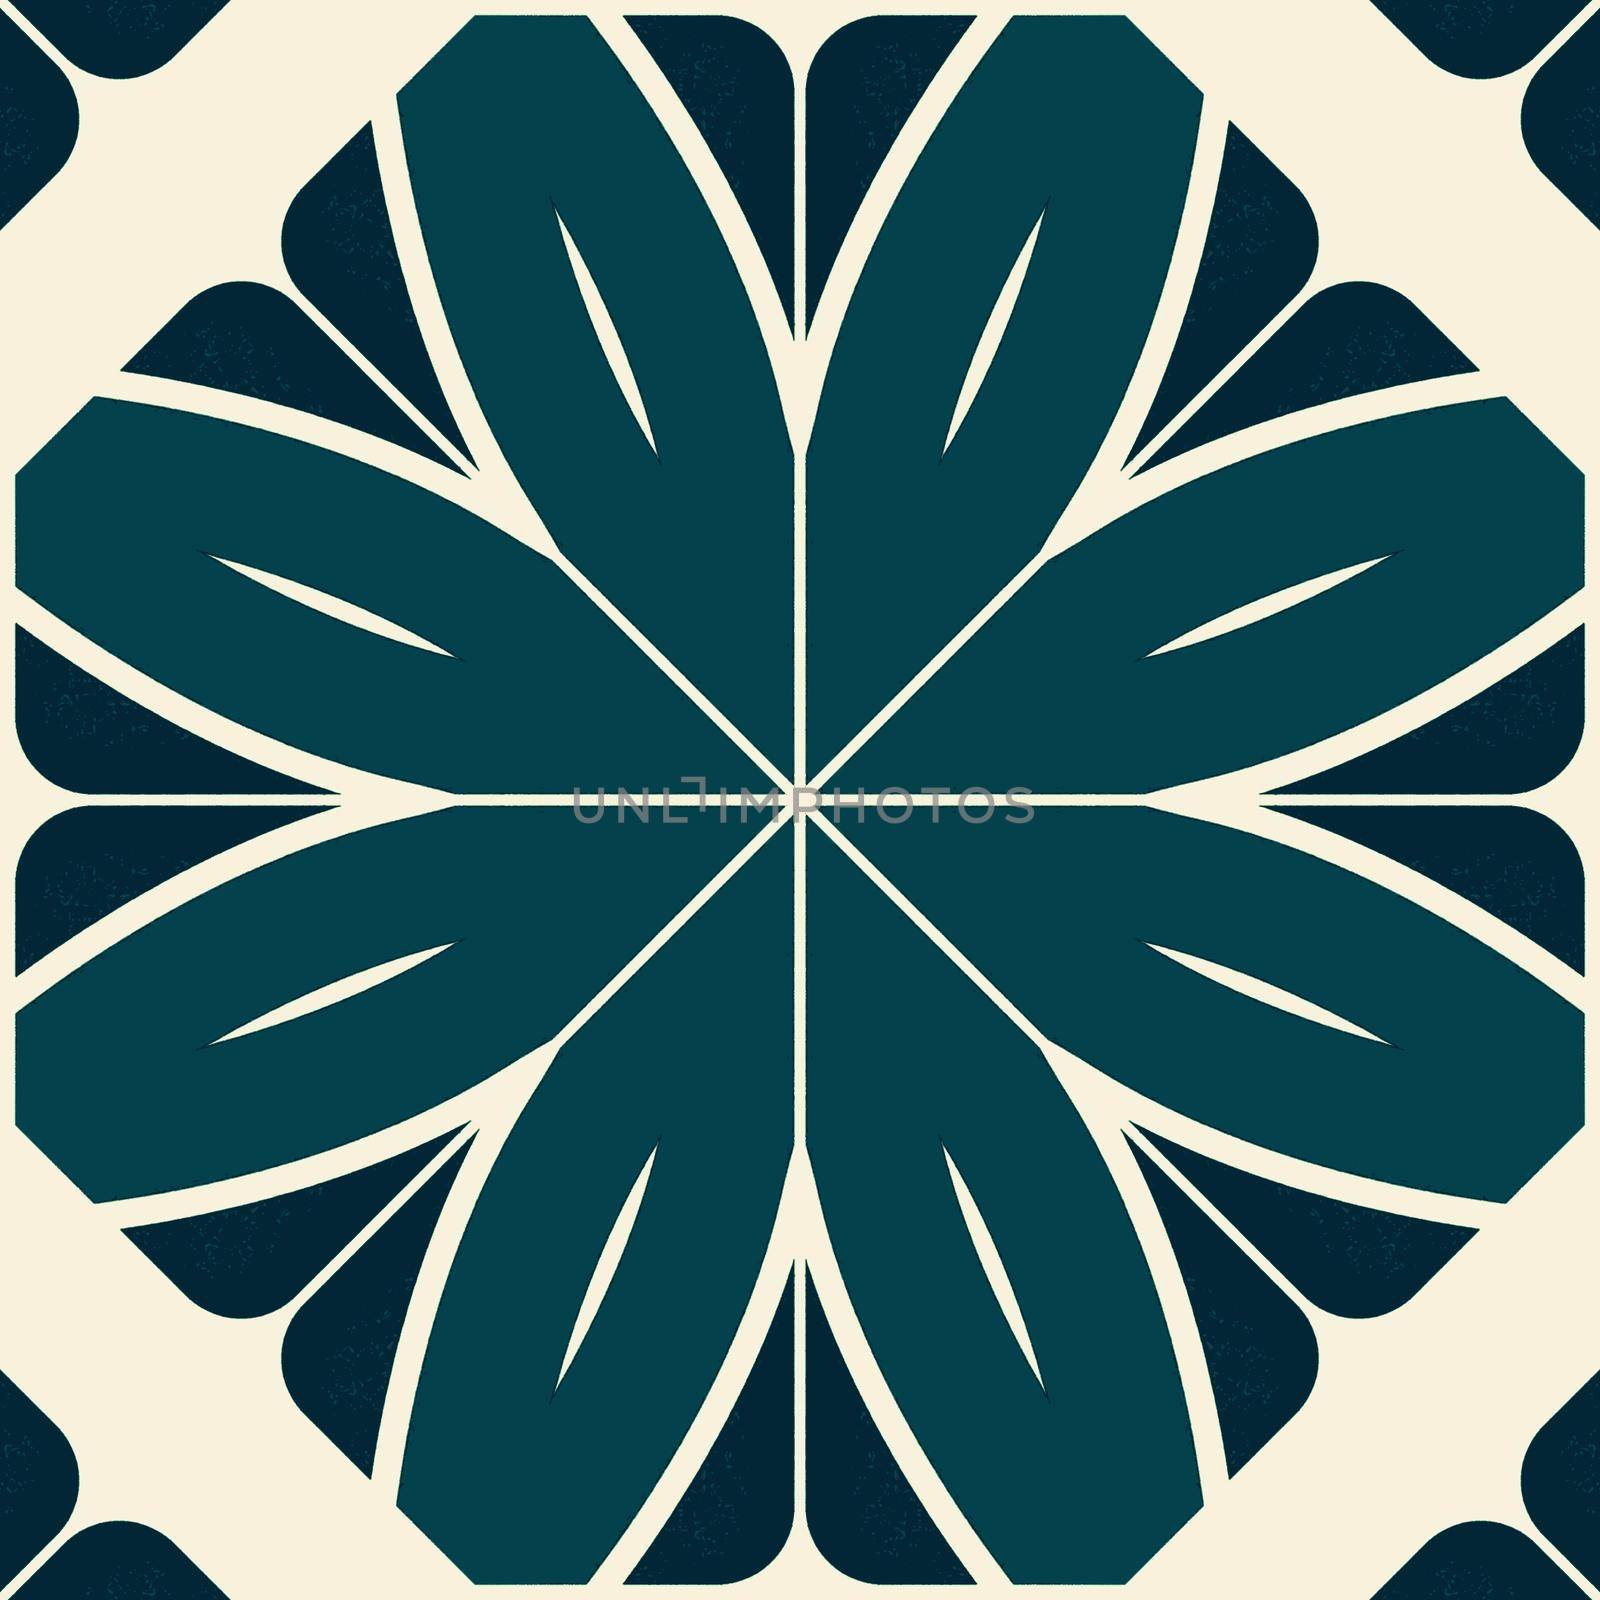 Beautiful shades of green color symmetrical patterns designs. Concept of home decor and interior designing by tabishere